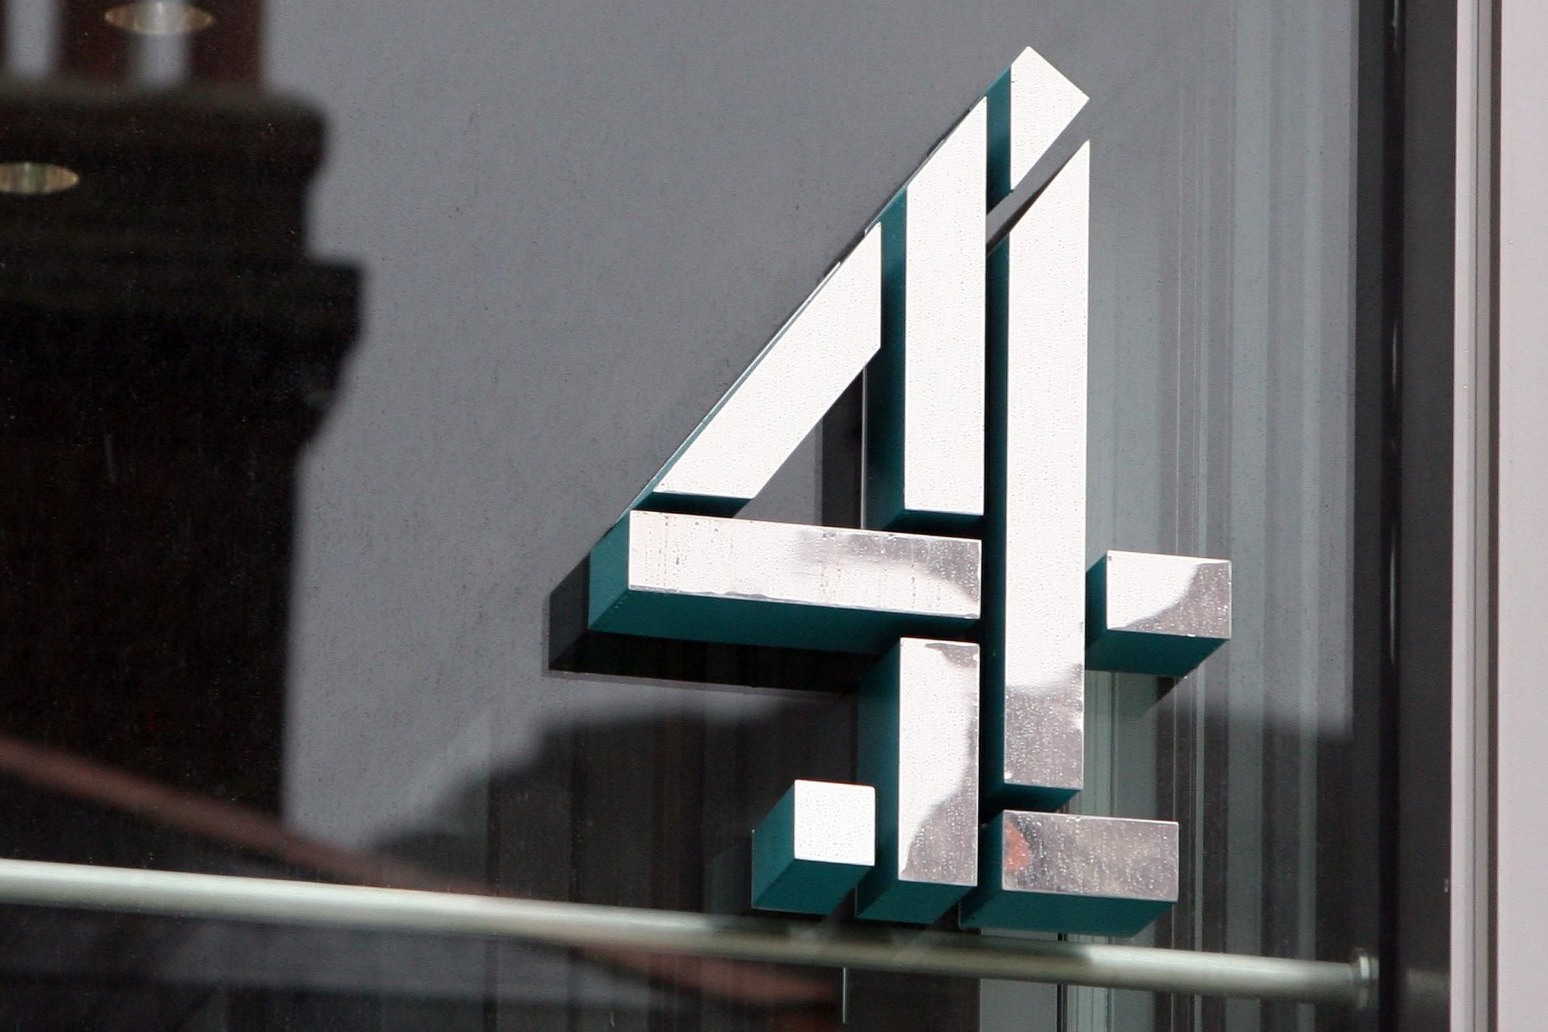 Tory MP questions plan to privatise Channel 4 as ‘revenge’ for biased coverage 